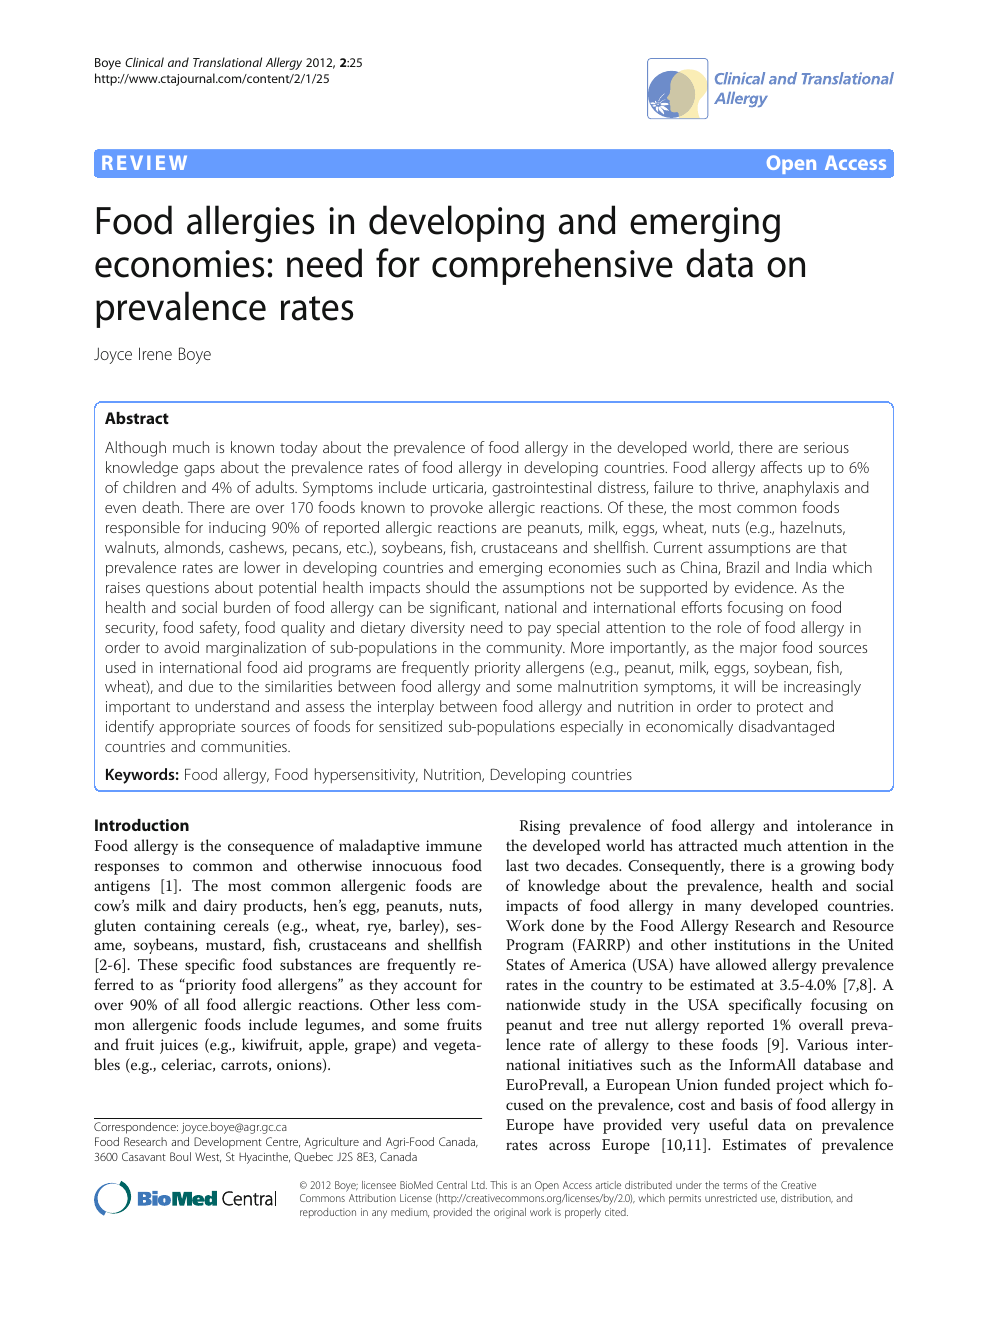 Allergenic Foods and their Allergens, with links to Informall